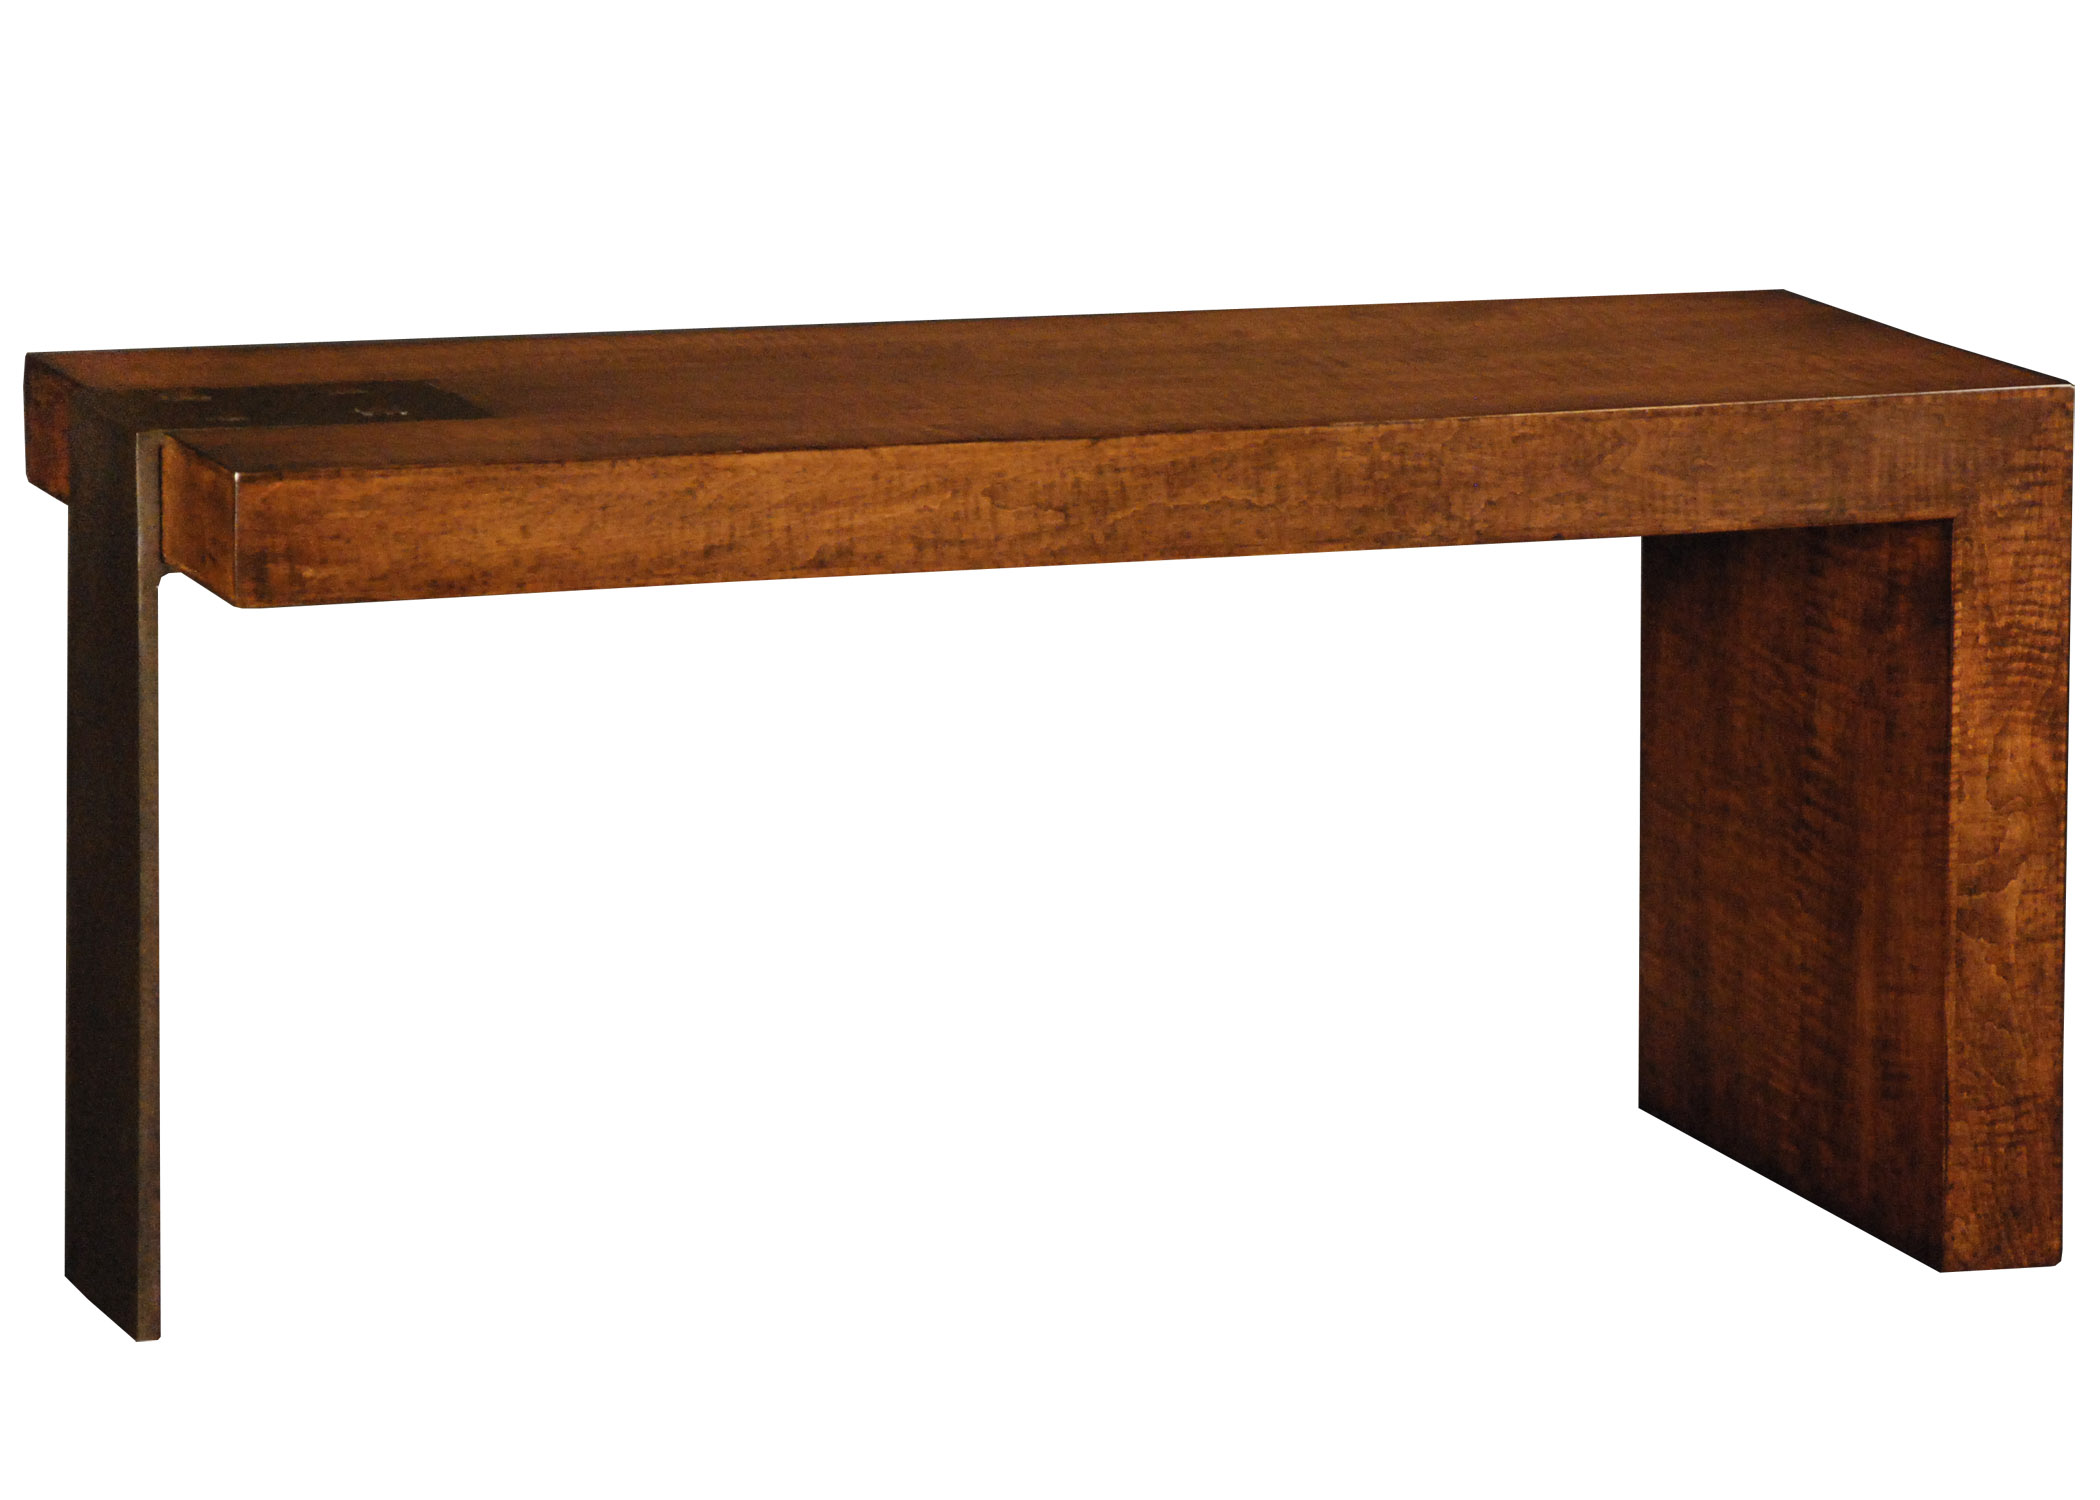 Rolando contemporary industrial metal and wood console sofa table by Woodland furniture in Idaho Falls